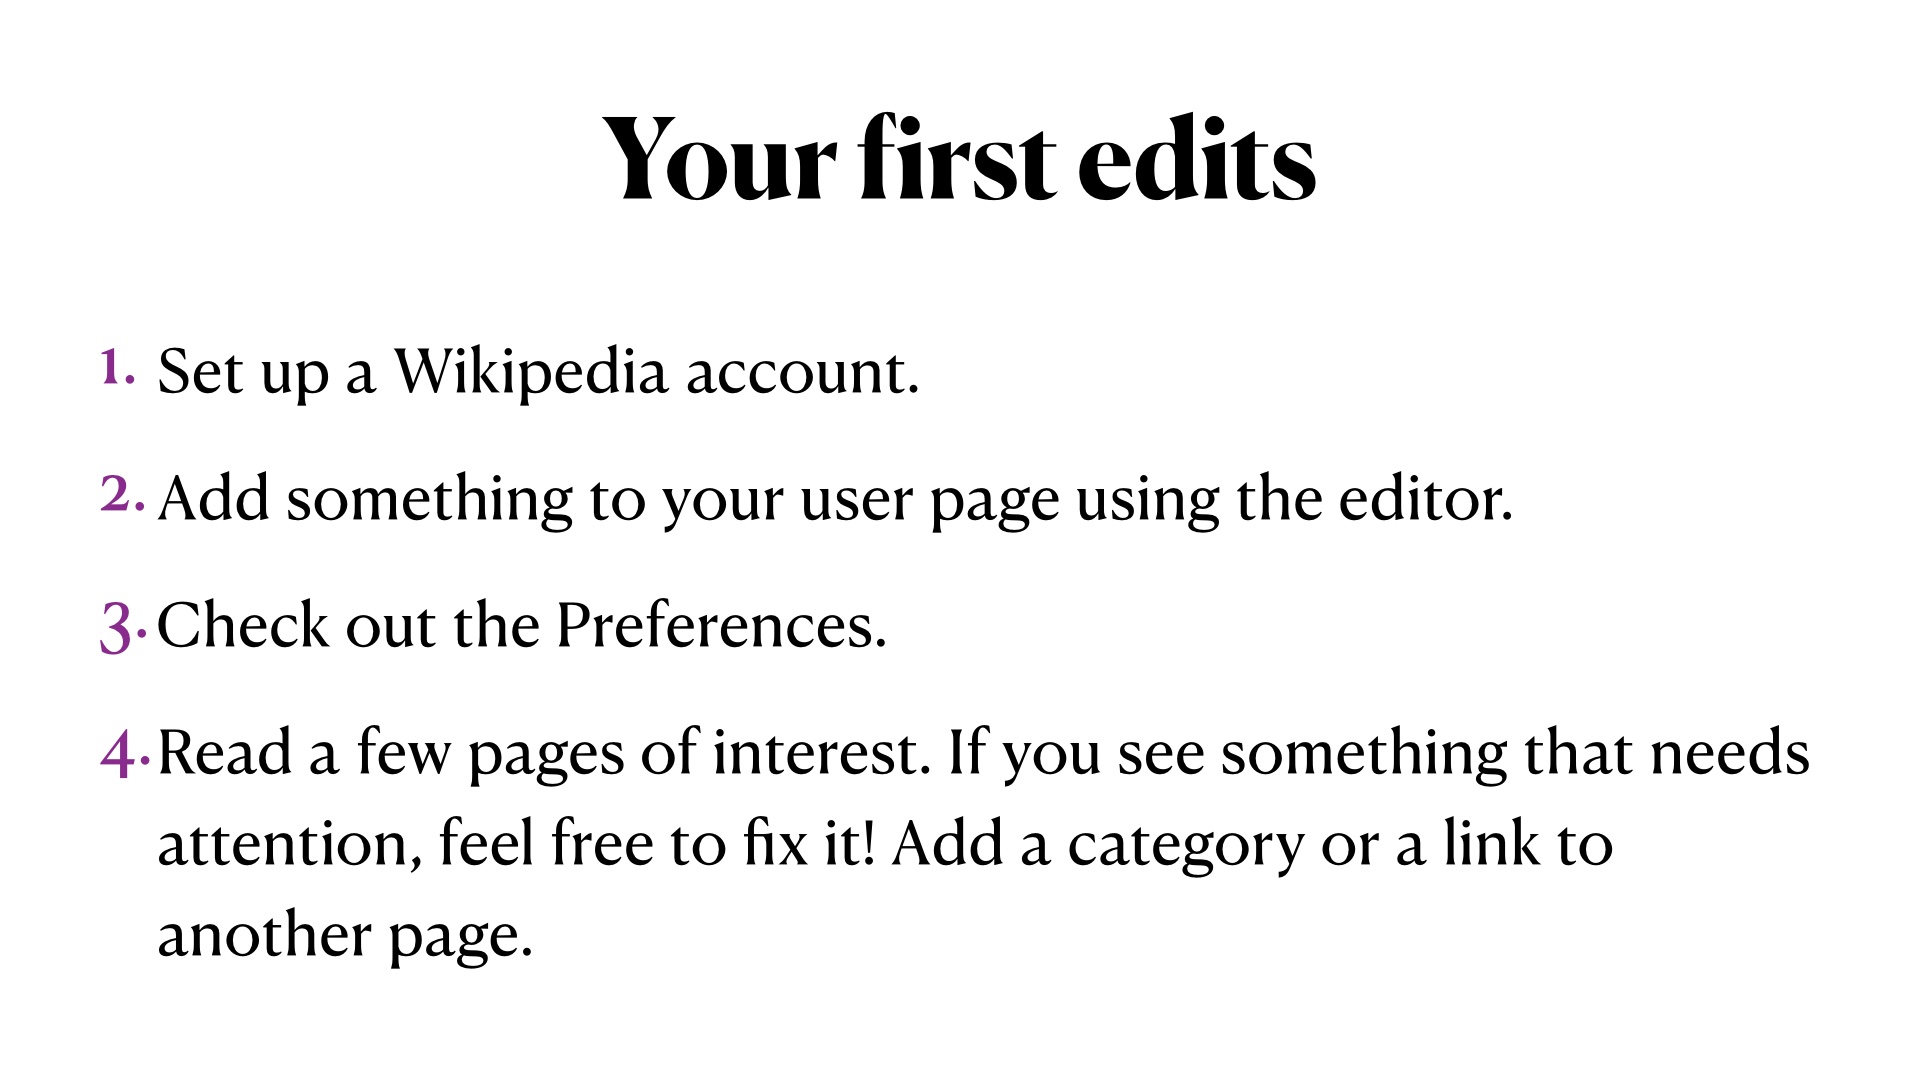 Your first edits: Set up a Wikipedia account.
Add something to your user page using the editor.
Check out the Preferences.
Read a few pages of interest. If you see something that needs attention, feel free to fix it! Add a category or a link to another page.